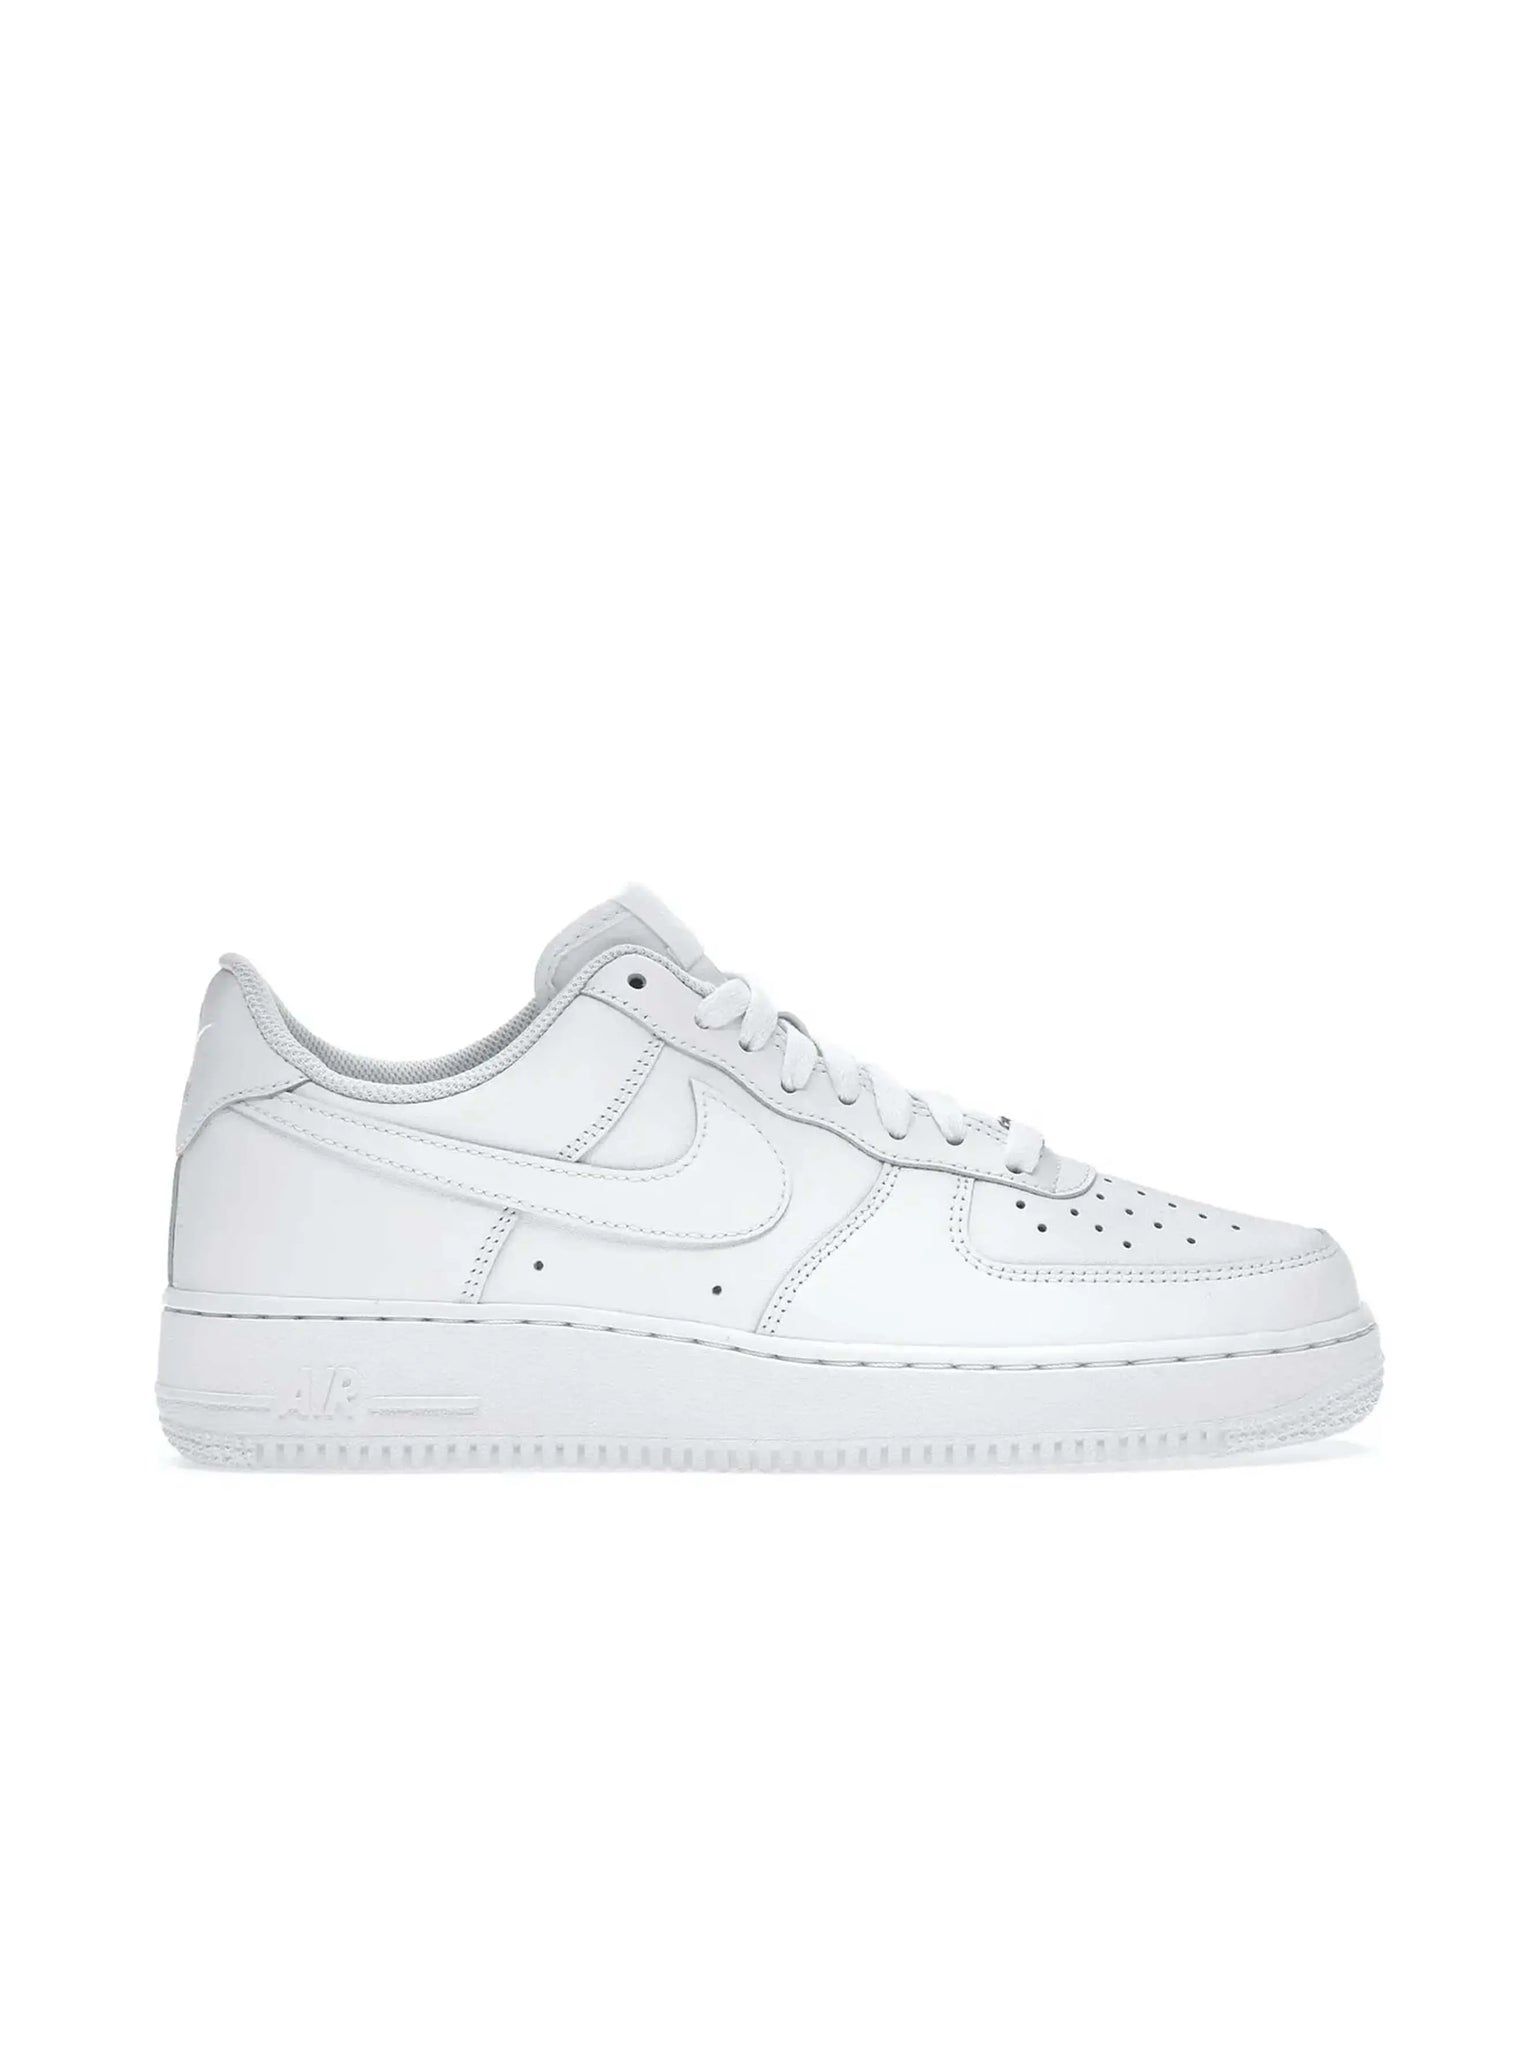 Nike Air Force 1 Low '07 White in Melbourne, Australia - Prior